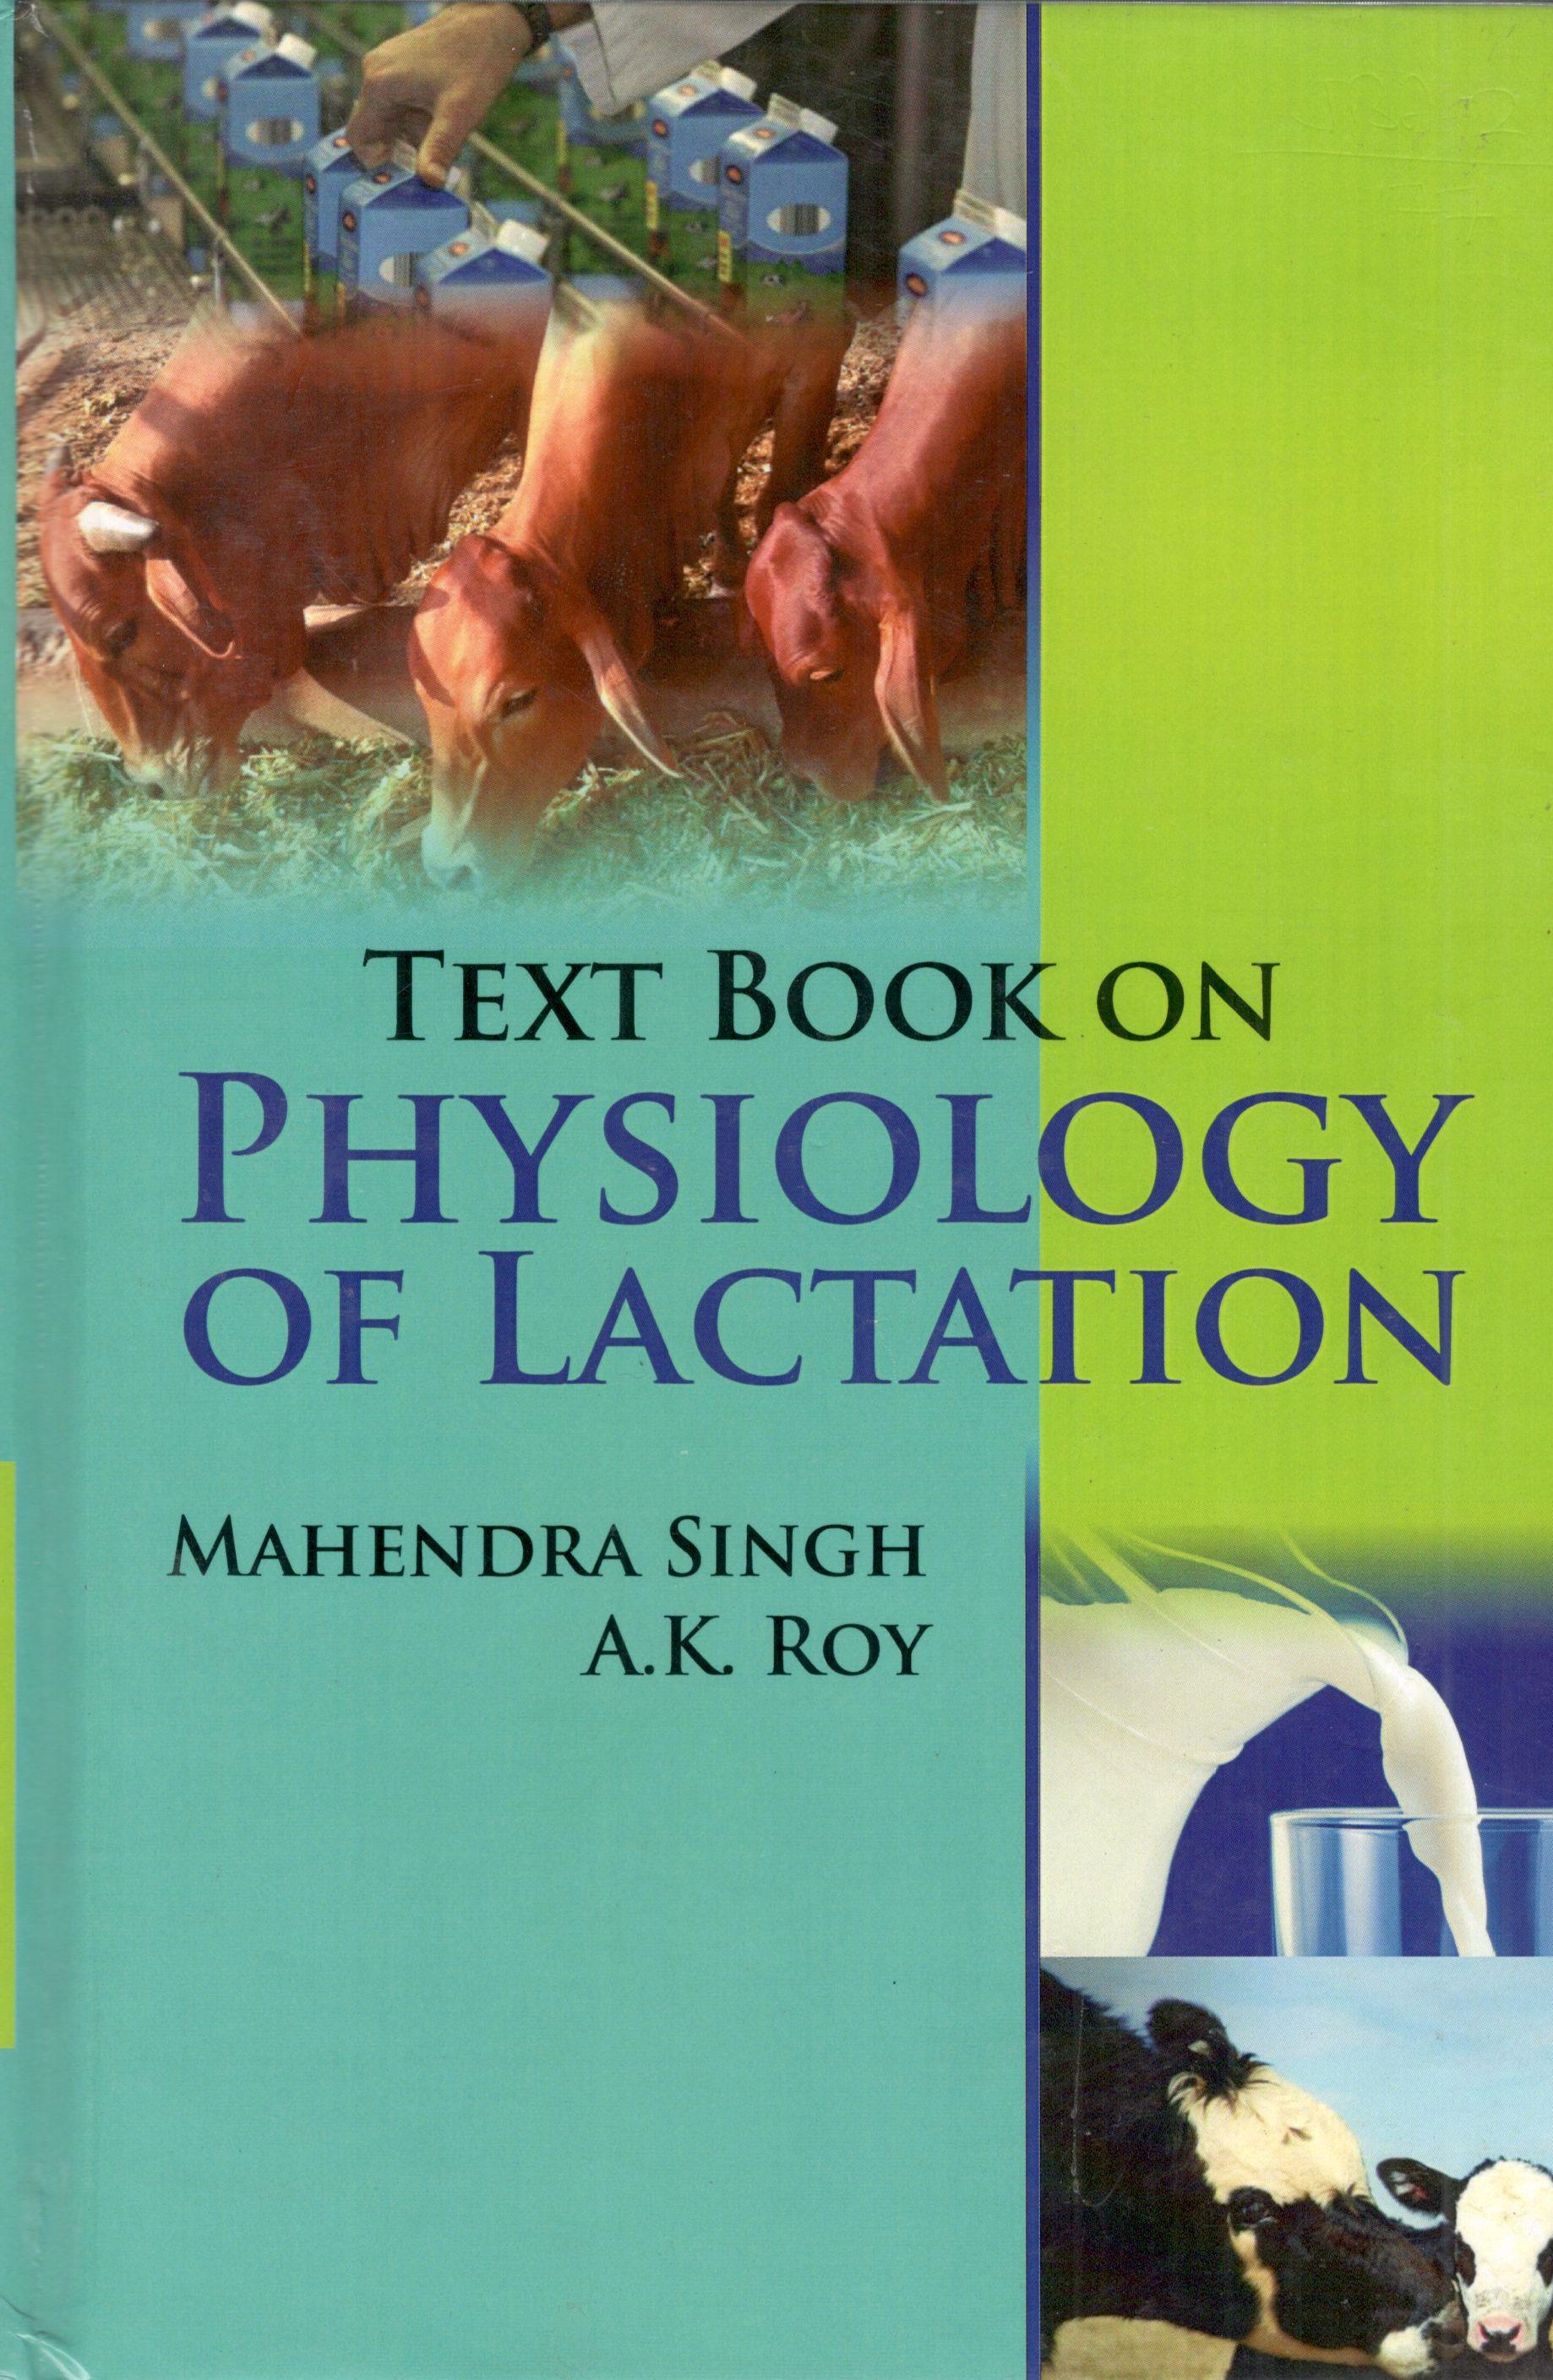 Text Book on Physiology of Lactation